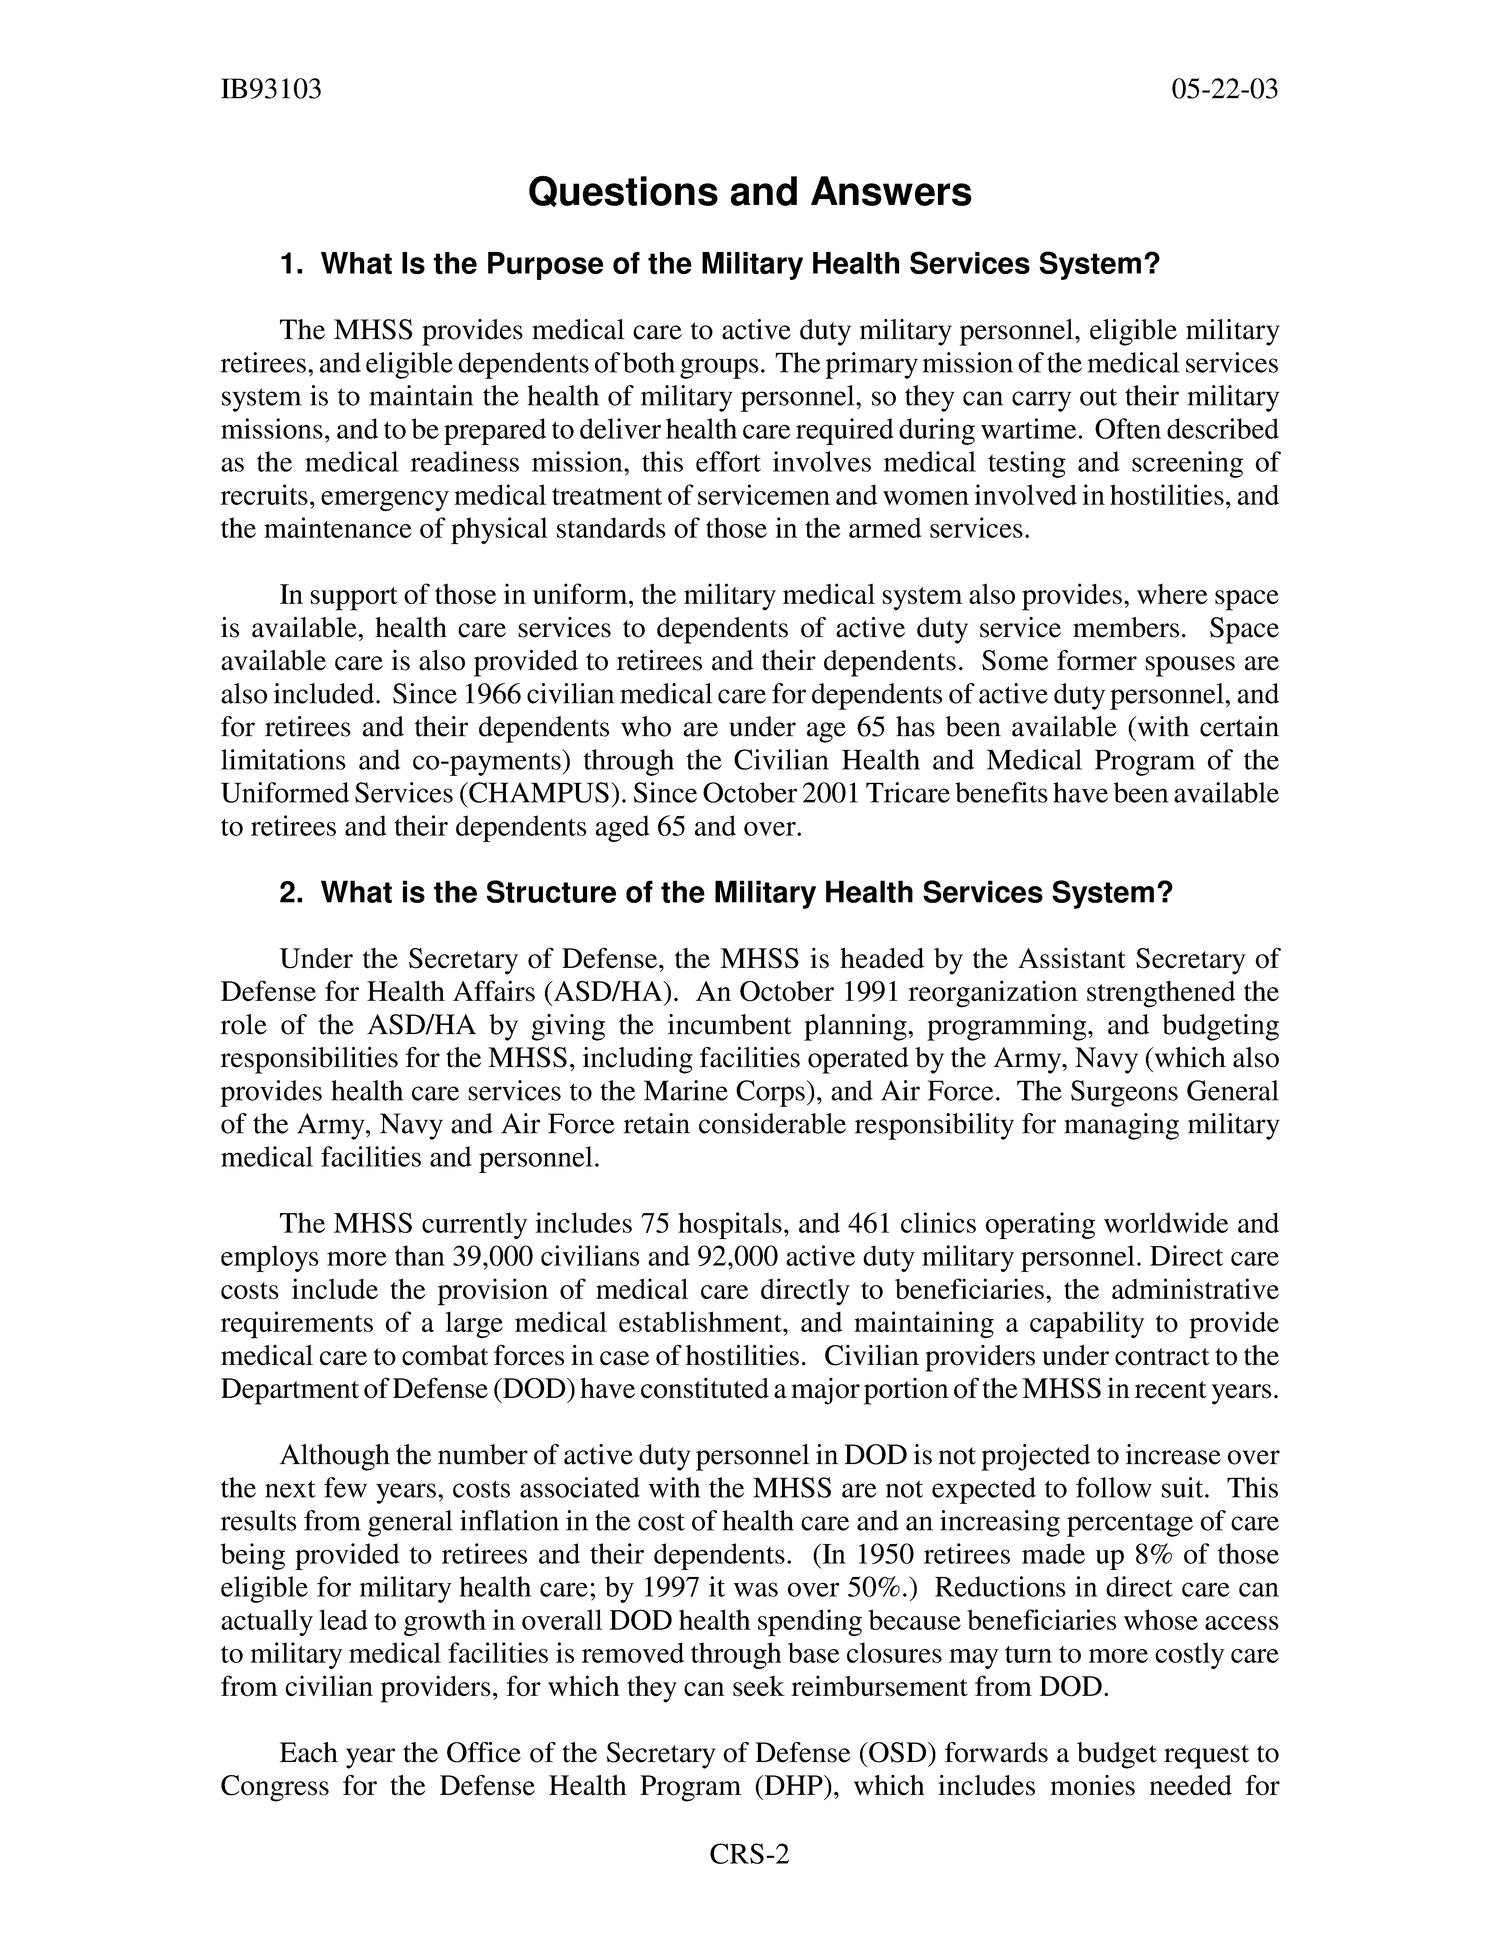 Military Medical Care Services: Questions and Answers
                                                
                                                    [Sequence #]: 5 of 17
                                                